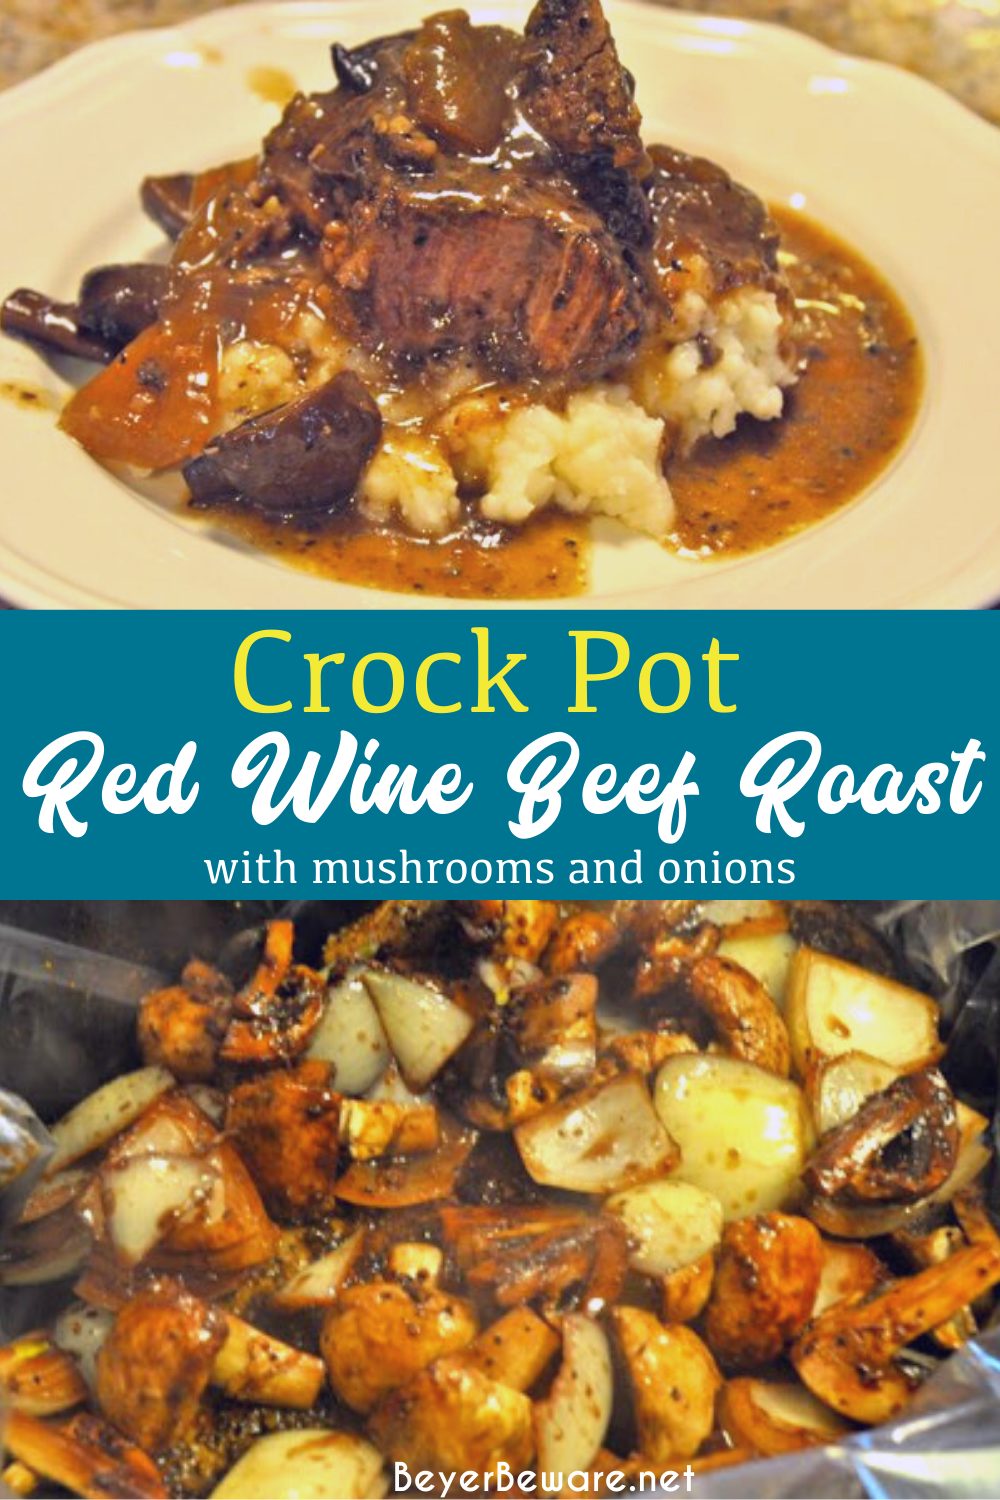 Red wine crock pot beef roast is a juicy and flavorful beef roast thanks to a quick pan-sear on the beef roast and with caramelized onions and mushrooms then slow-cooked in red wine all day. 